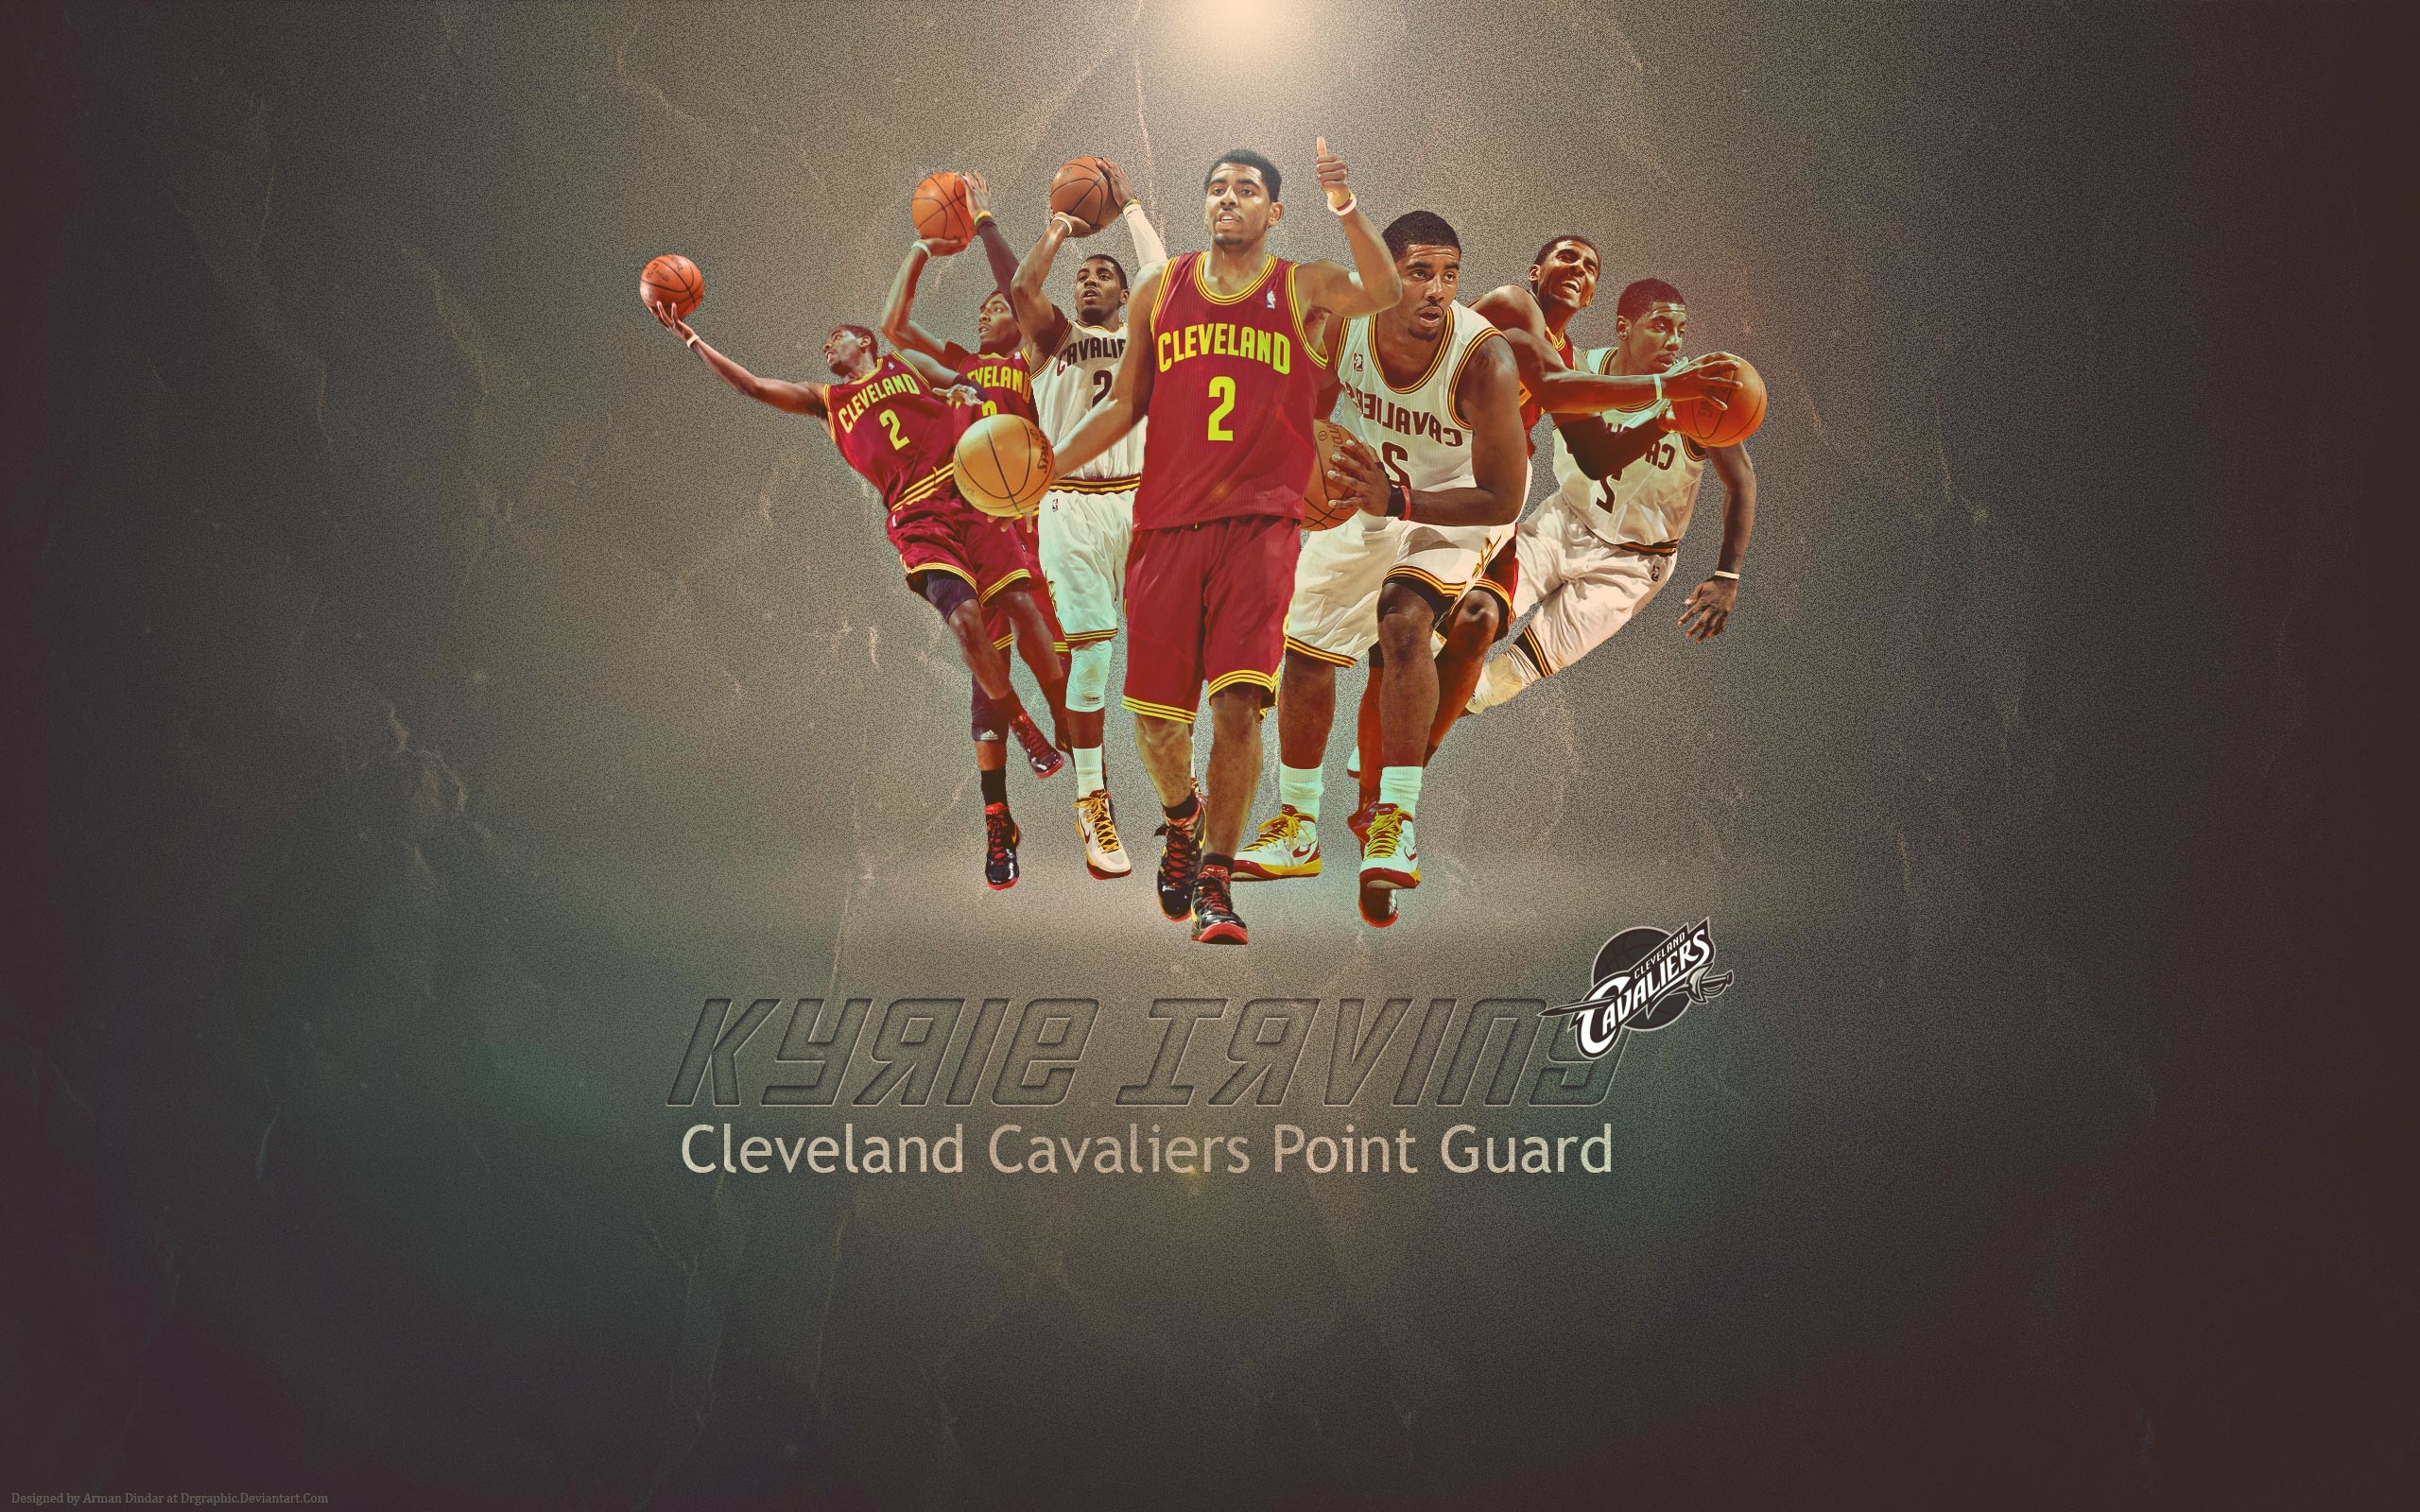 kyrie irving live wallpaper,football player,team,text,font,graphic design